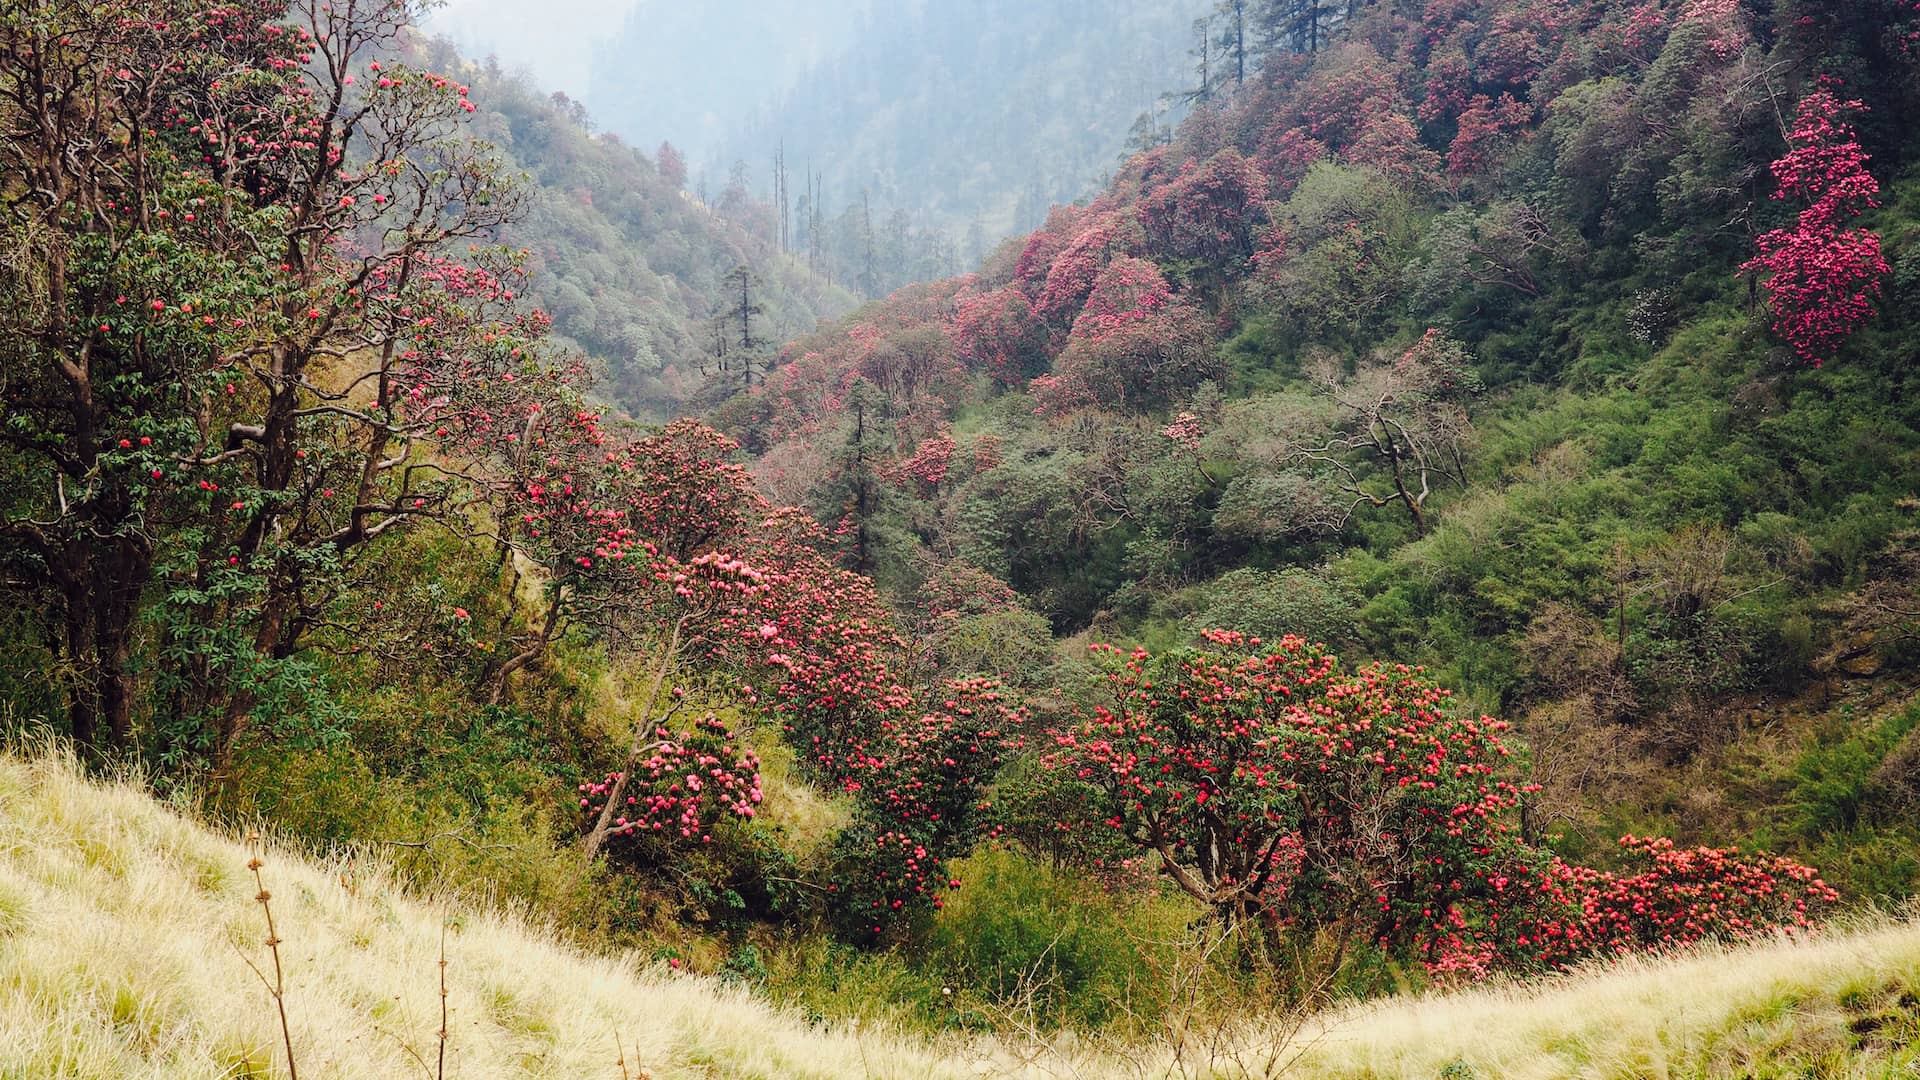 A green valley filled with red flowers